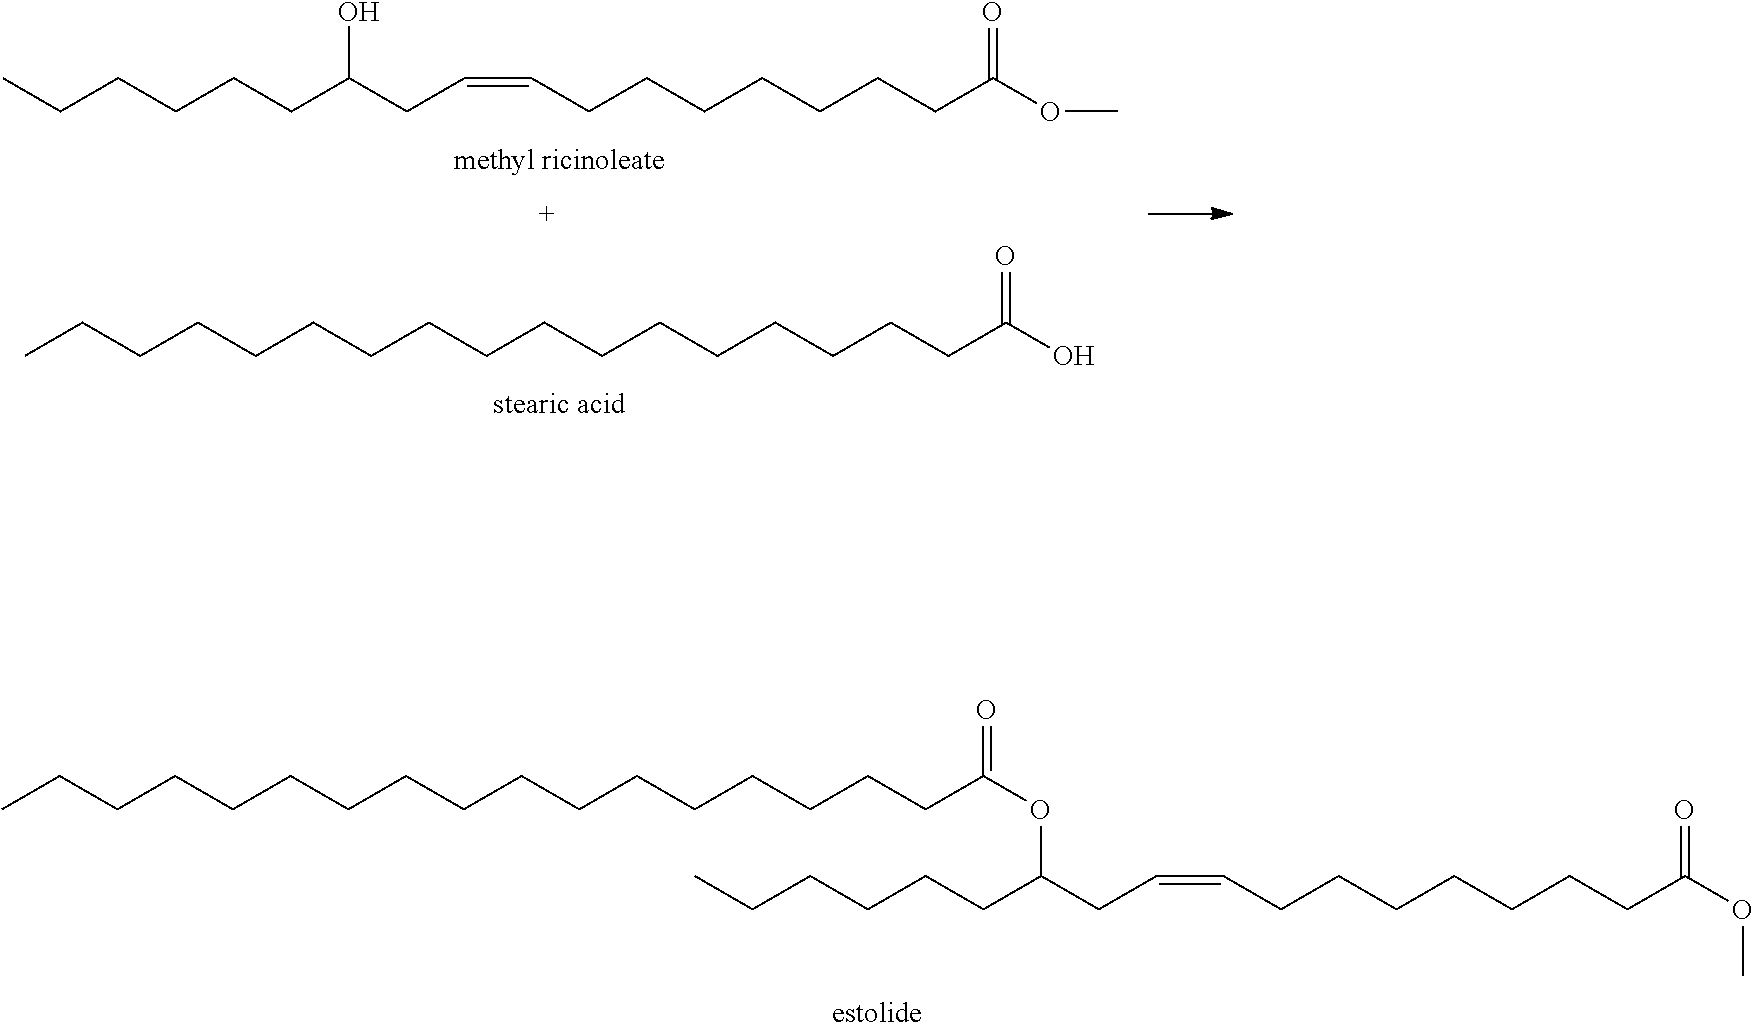 Enzymatic process for synthesizing estolides